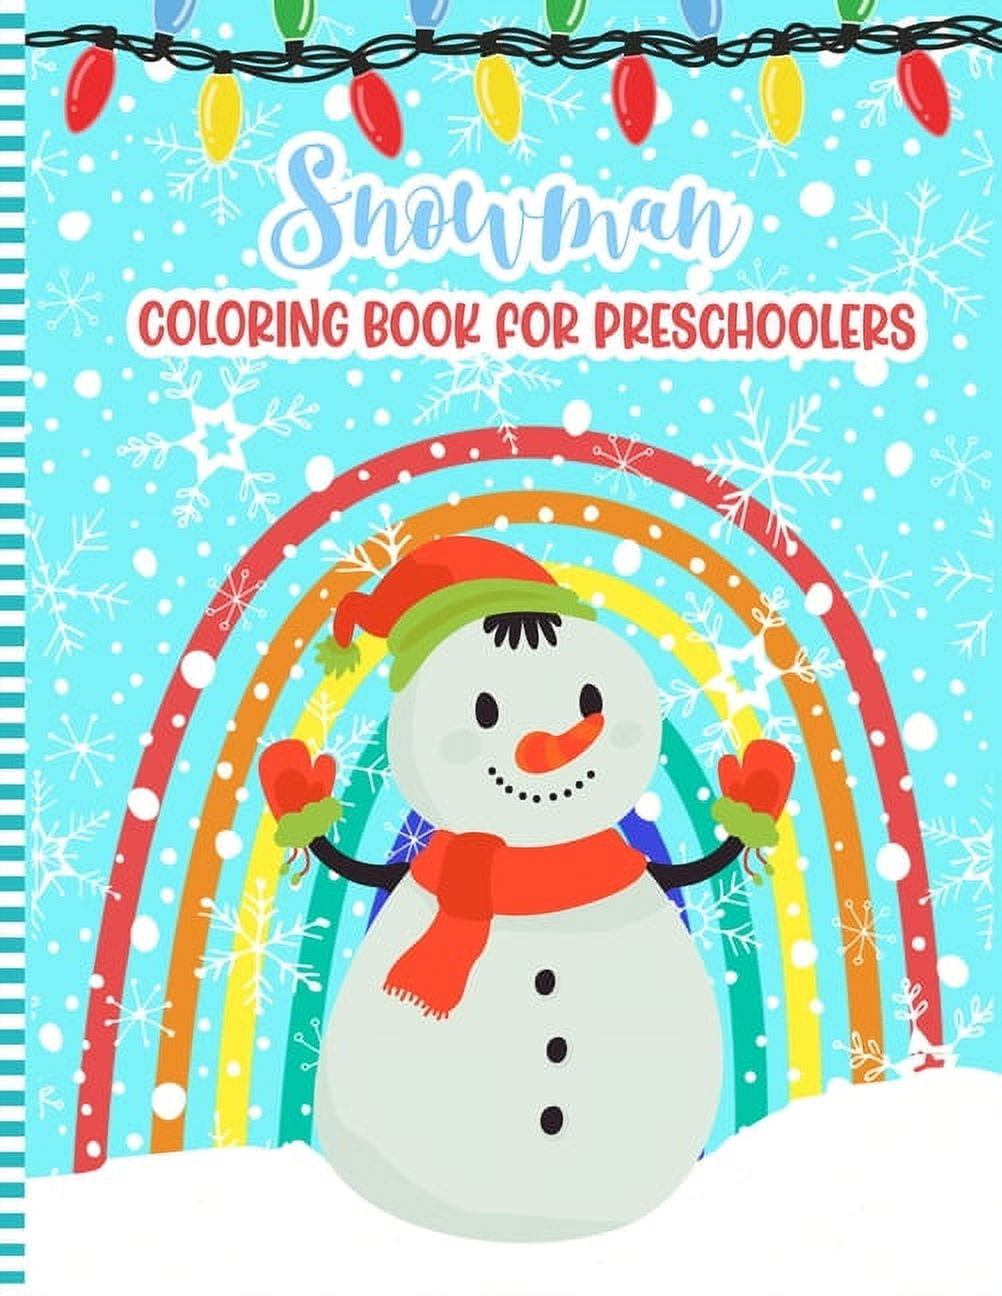 Snowman coloring book for preschoolers a fun xmas snowman activity coloring pages for children preschoolers toddlers kindergarten